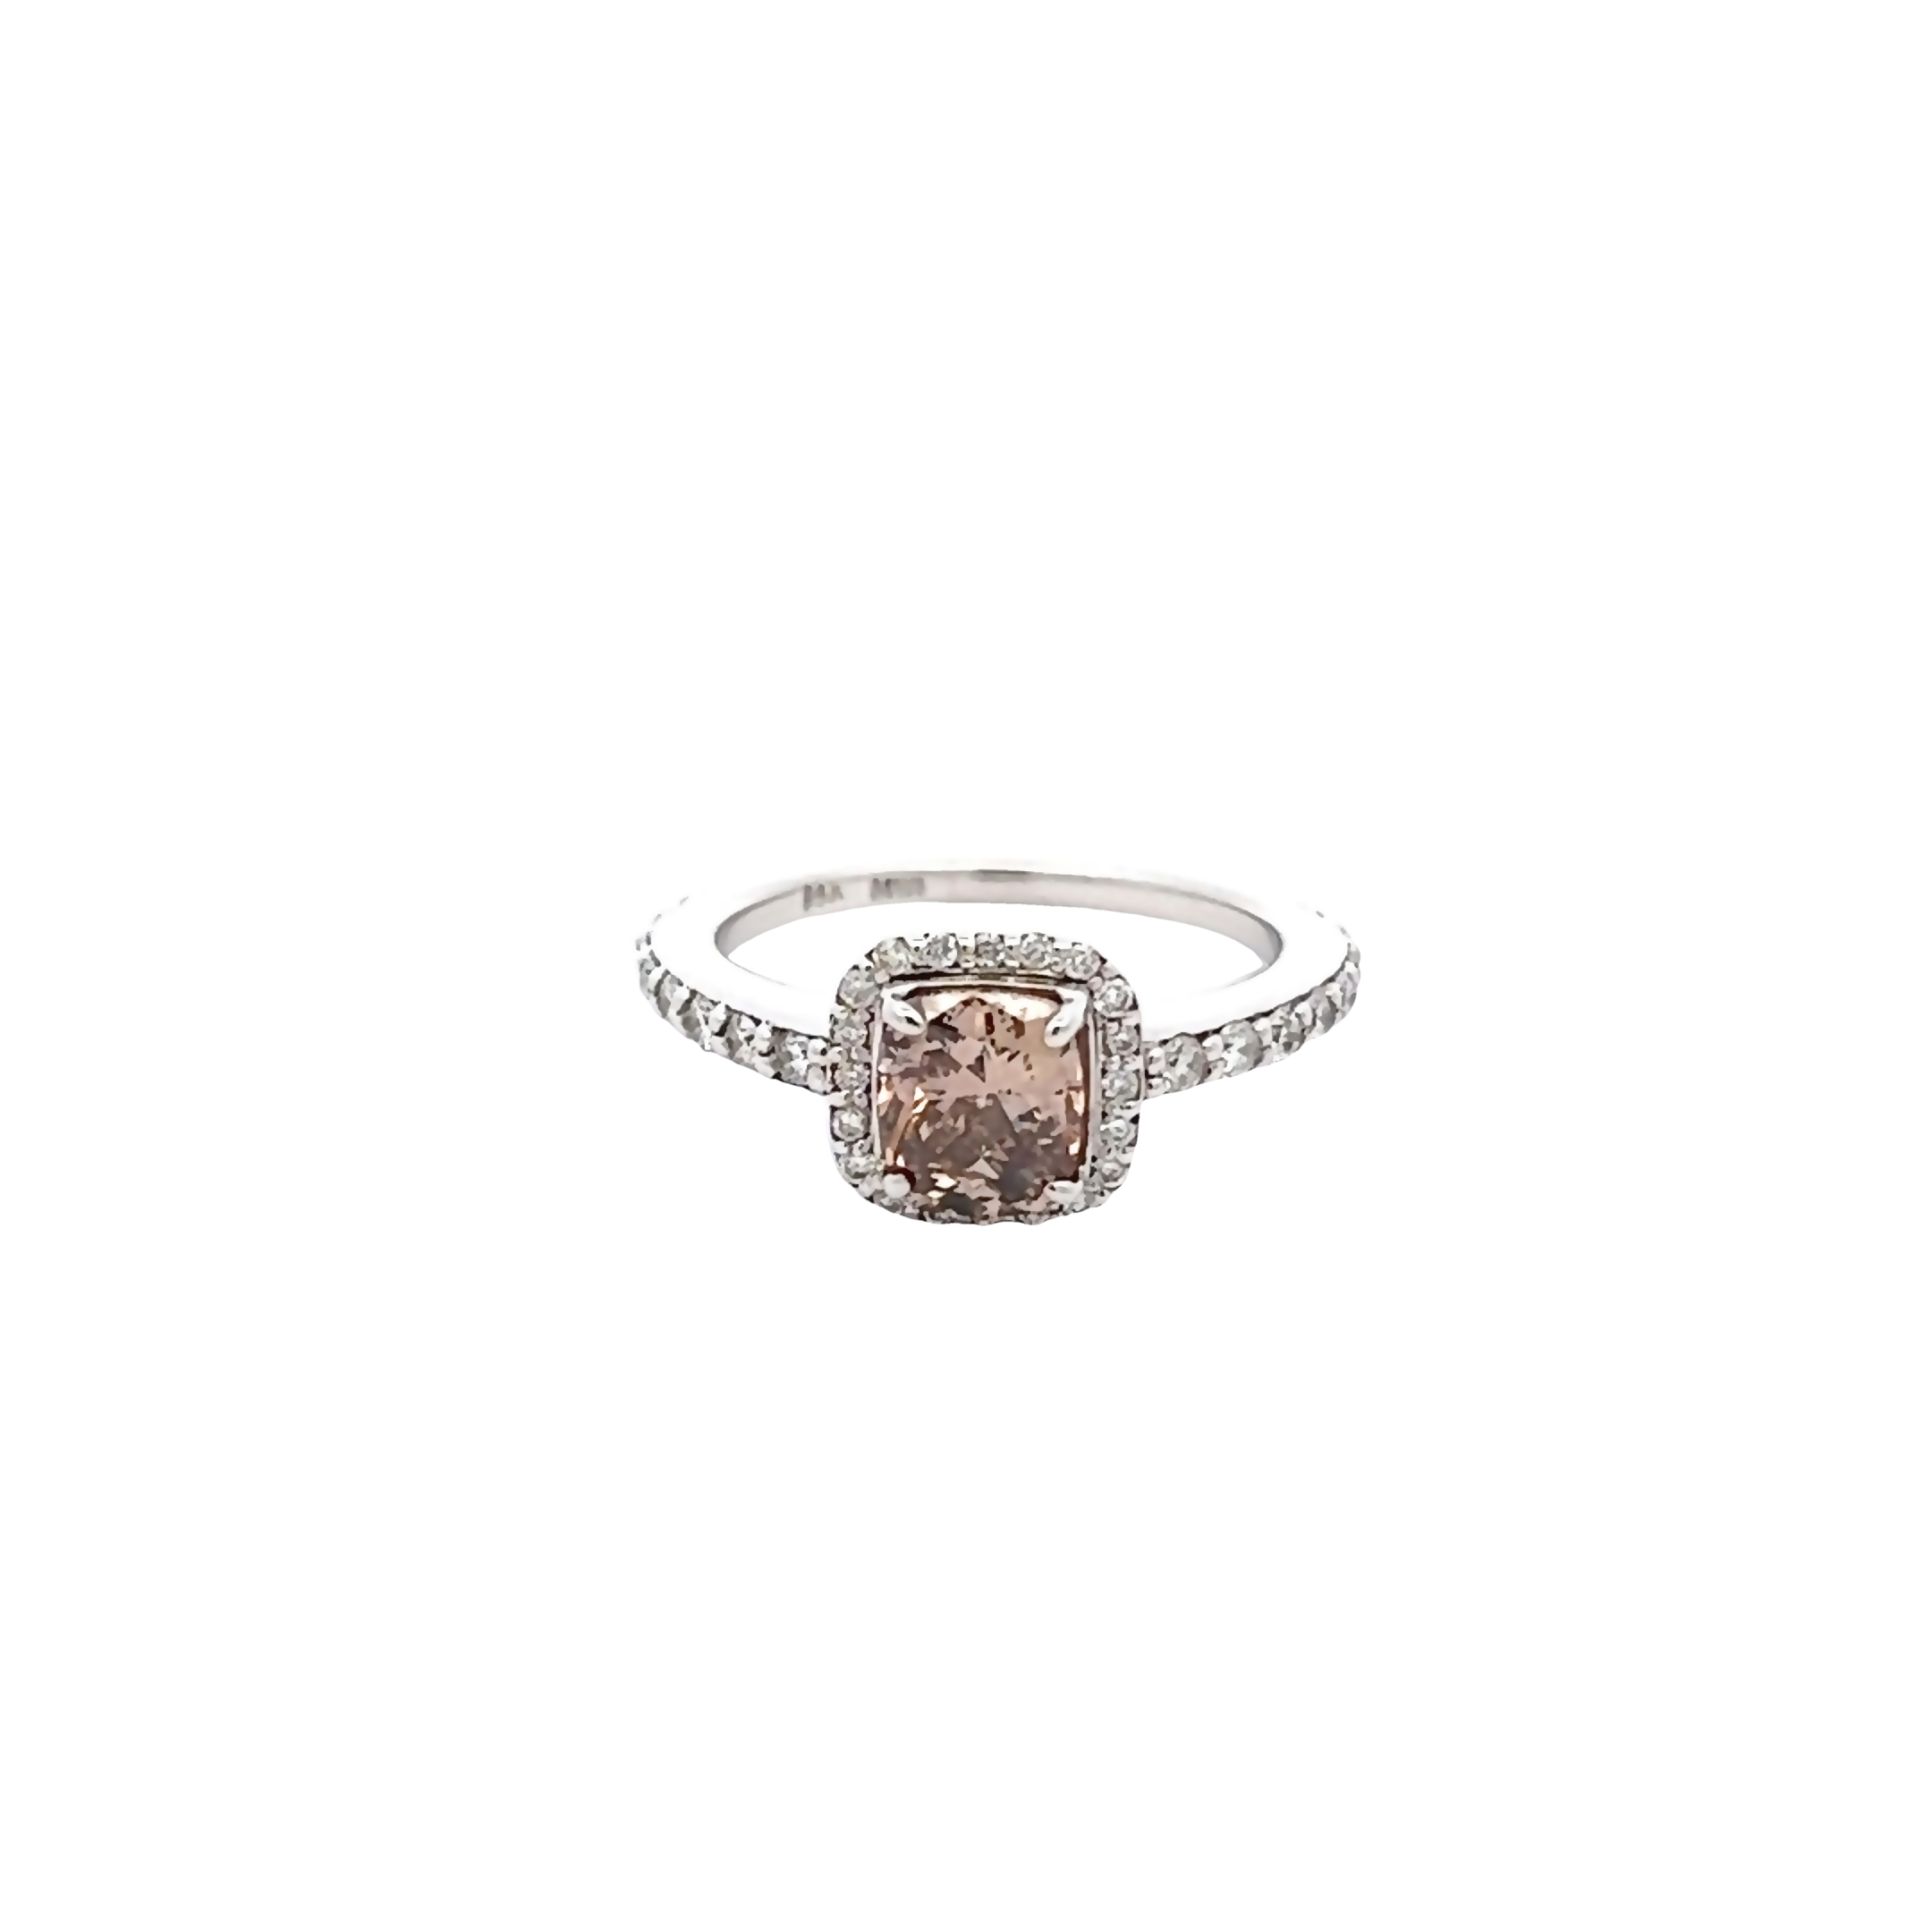 14 Karat white gold ring with One 1.07Ct cushion chocolate Diamond and 35=0.42 total weight round brilliant G VS Diamonds. Sixe 6.25